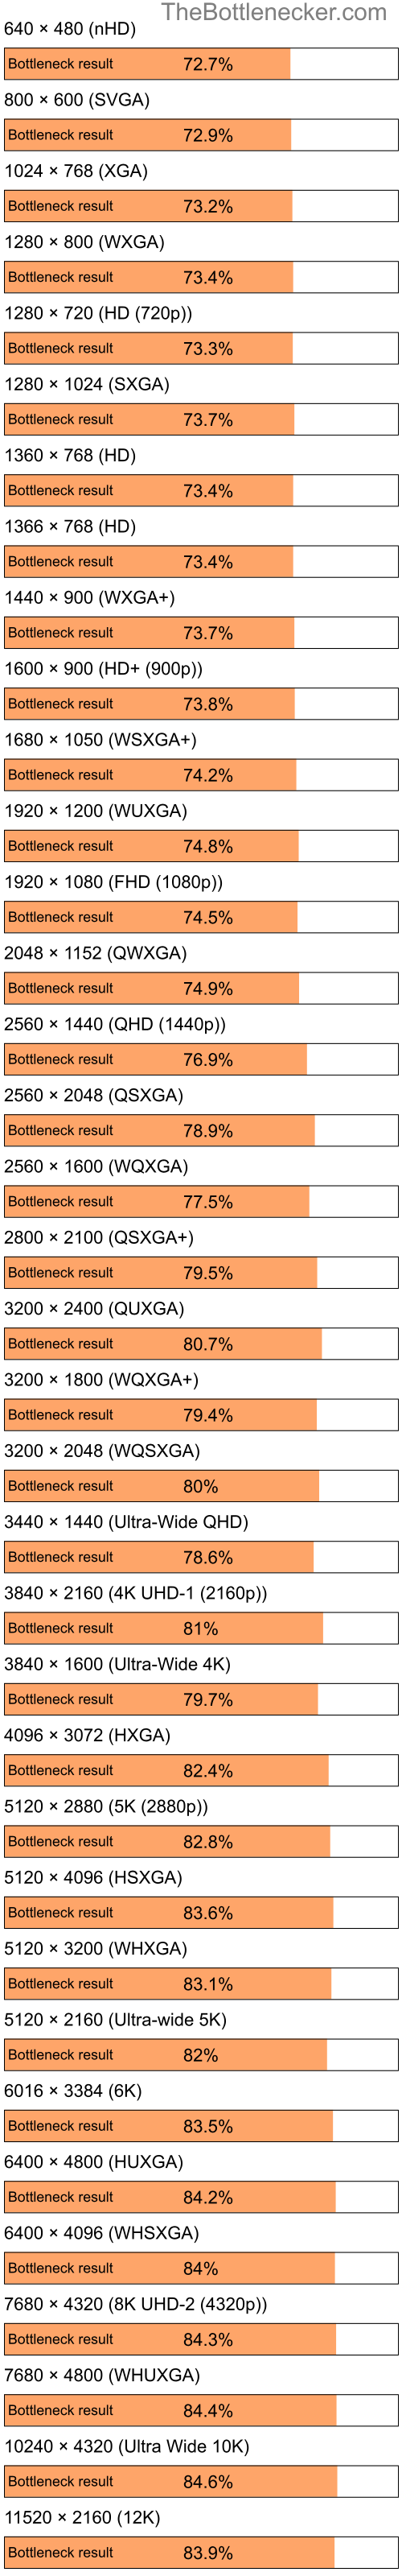 Bottleneck results by resolution for Intel Celeron and AMD Mobility Radeon X1300 in General Tasks